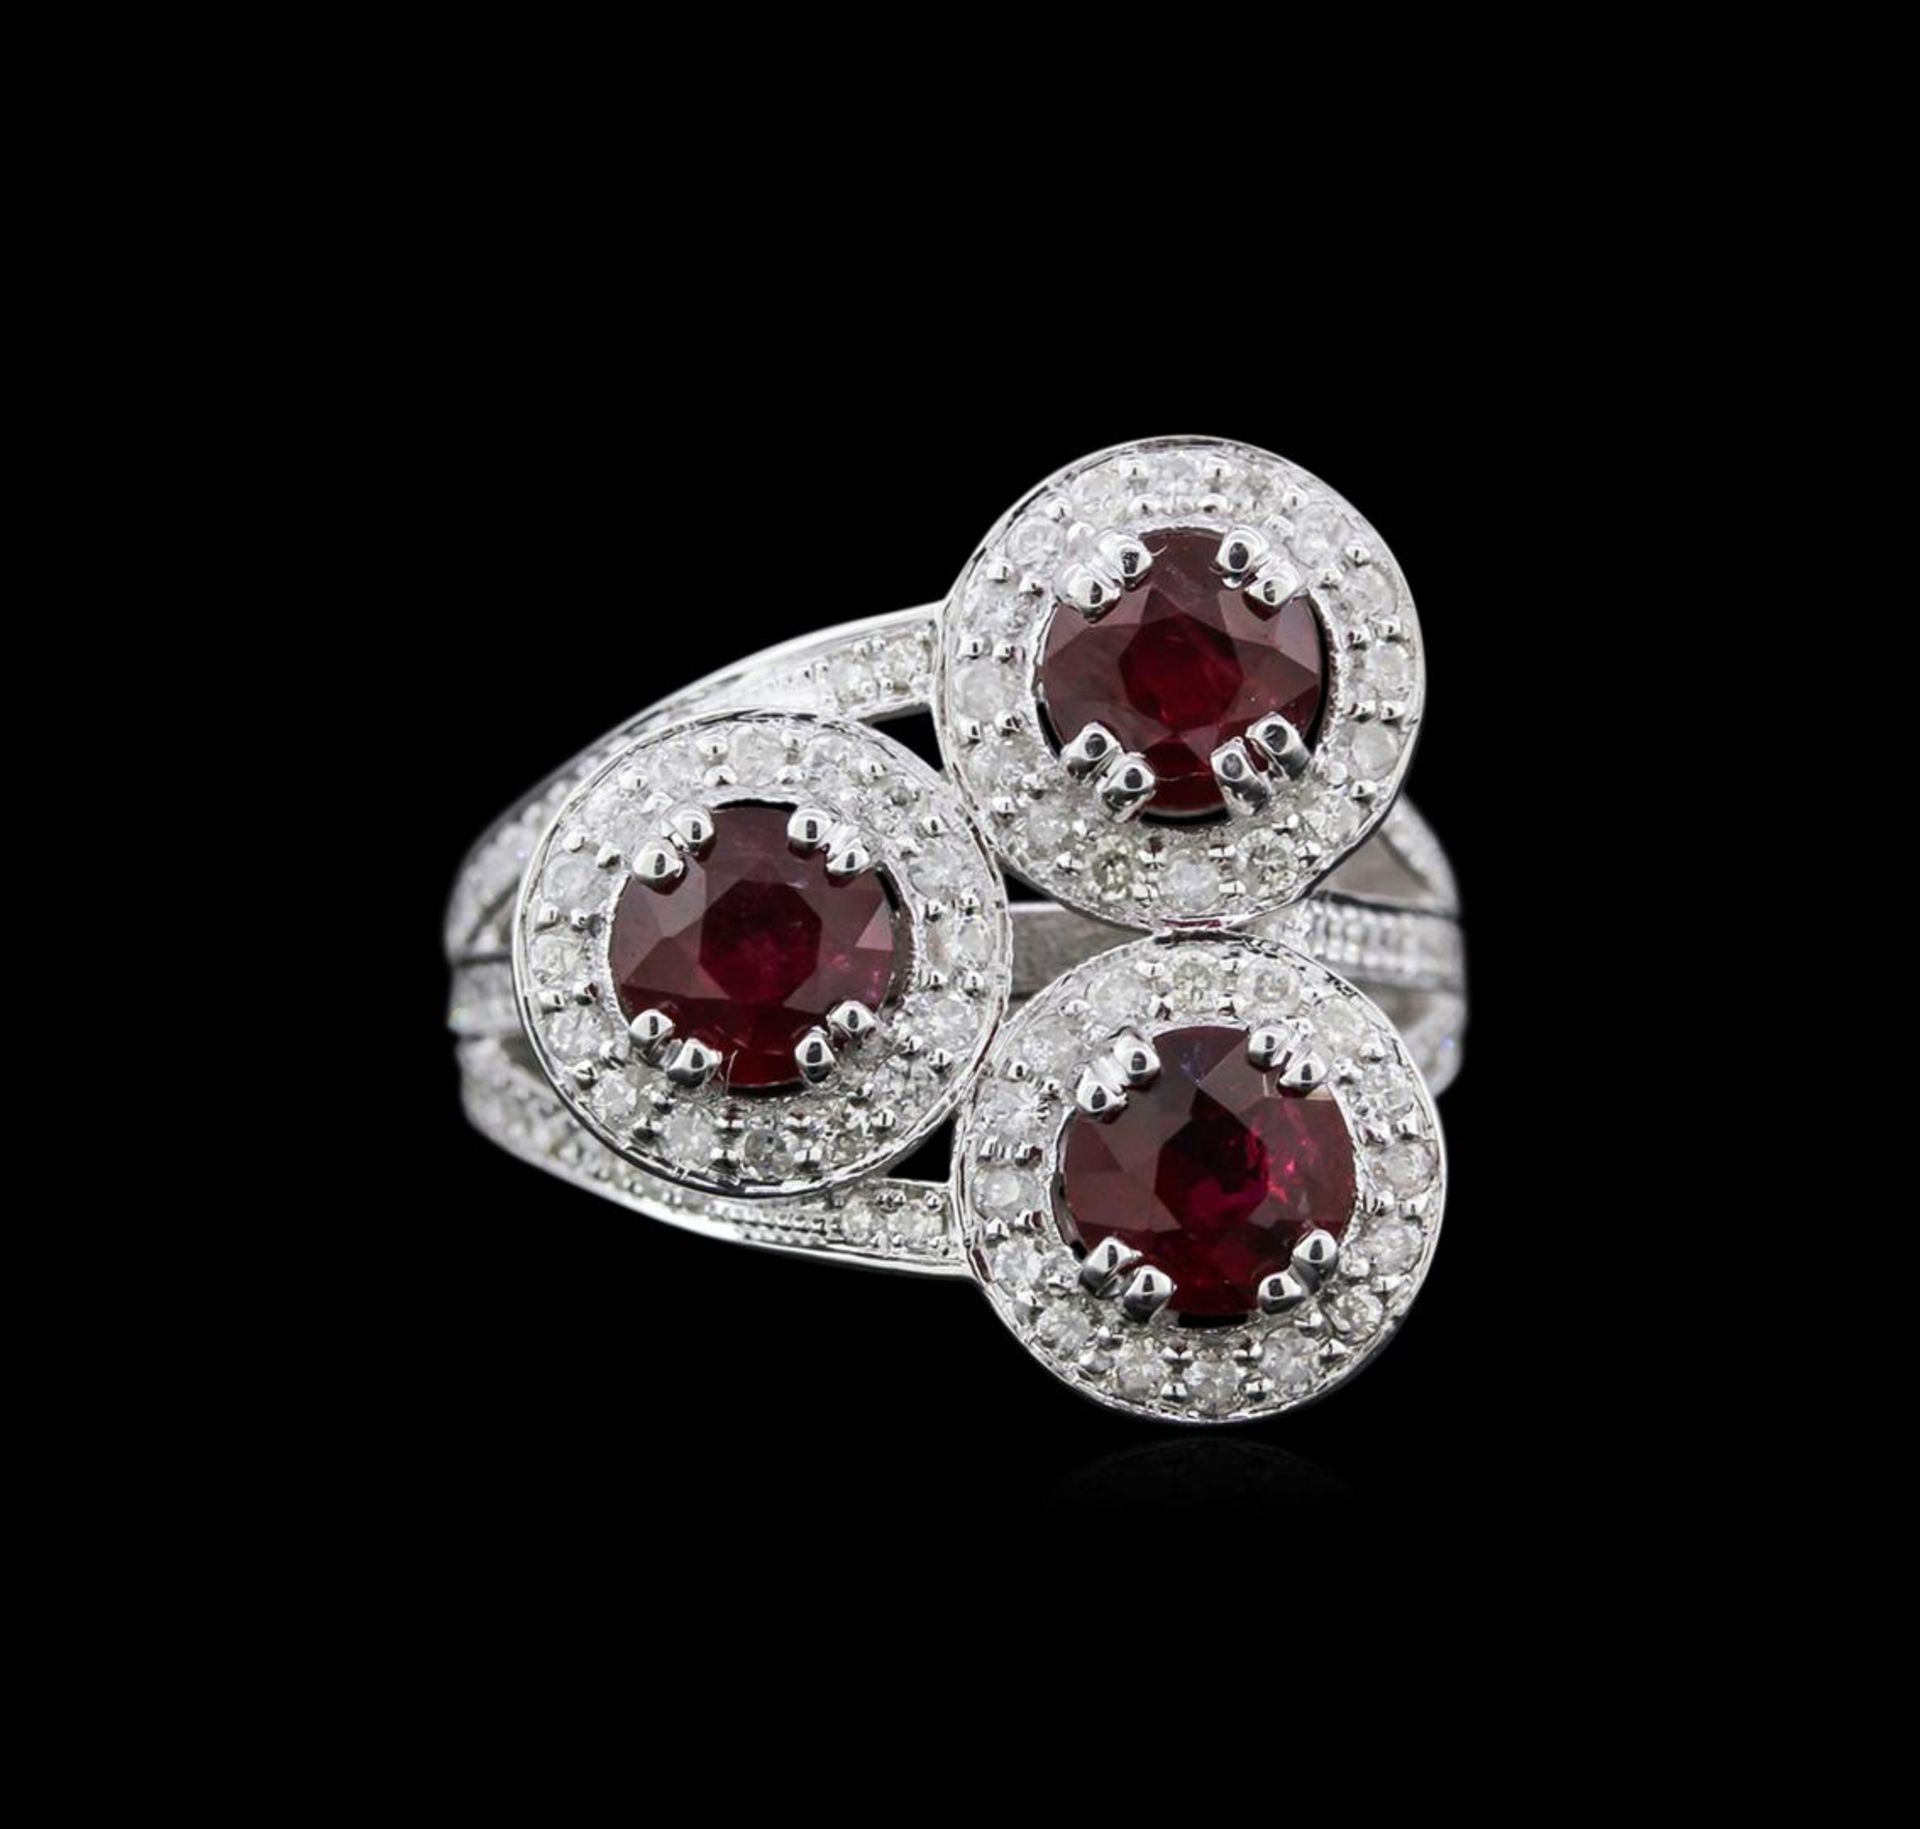 2.64 ctw Ruby and Diamond Ring - 14KT White Gold - Image 2 of 4